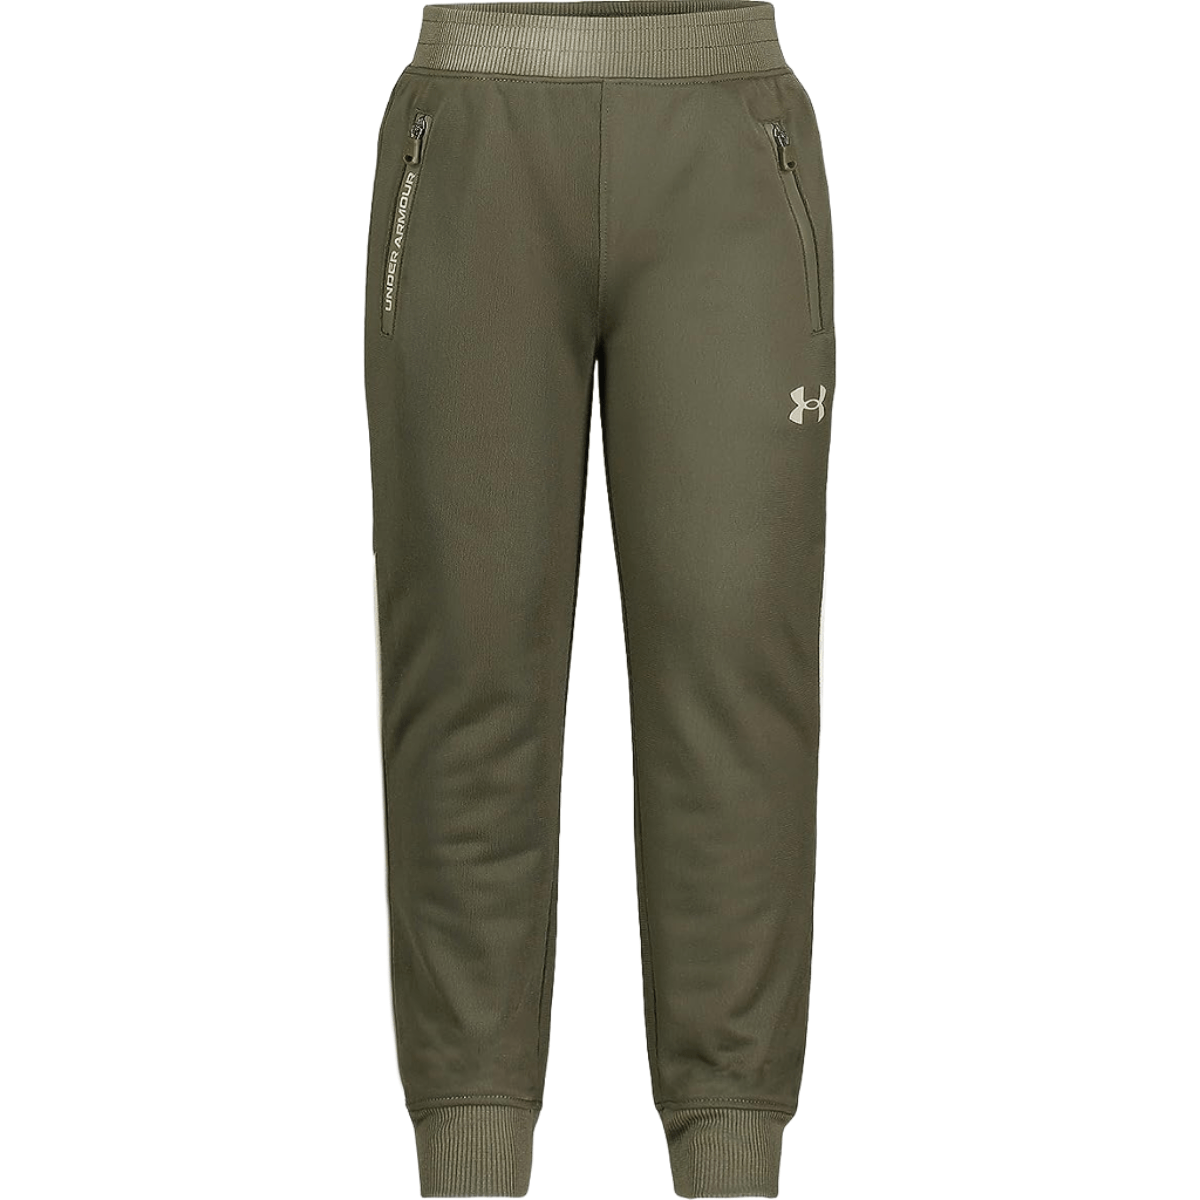 Under Armour Pennant Tapered Pant - Girls'